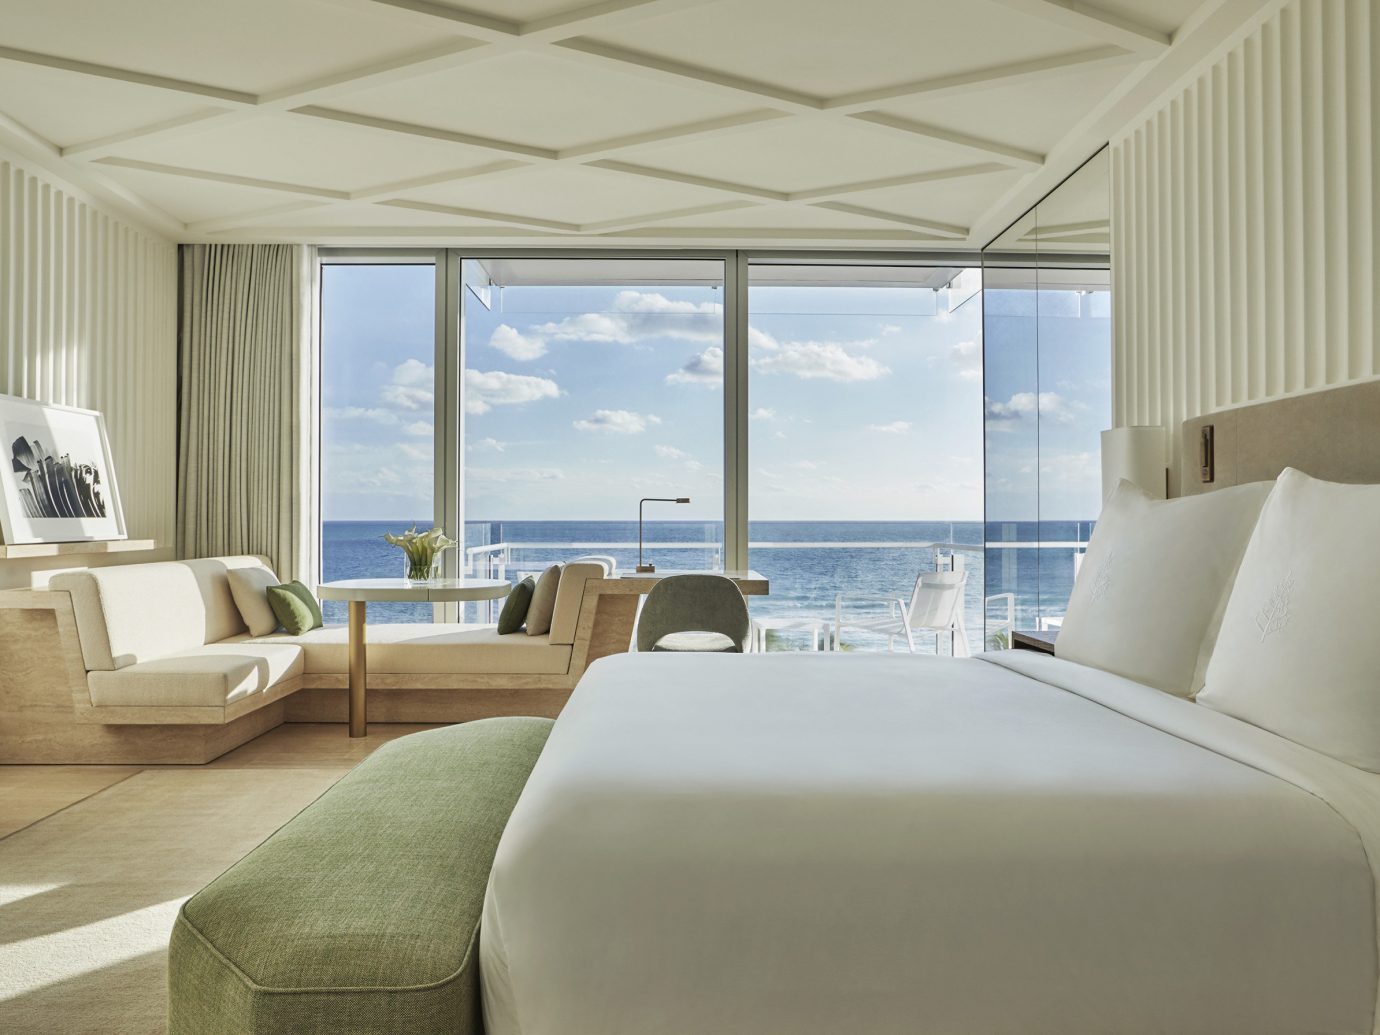 The 10 Best Luxury Hotels In Miami 2019 With Prices